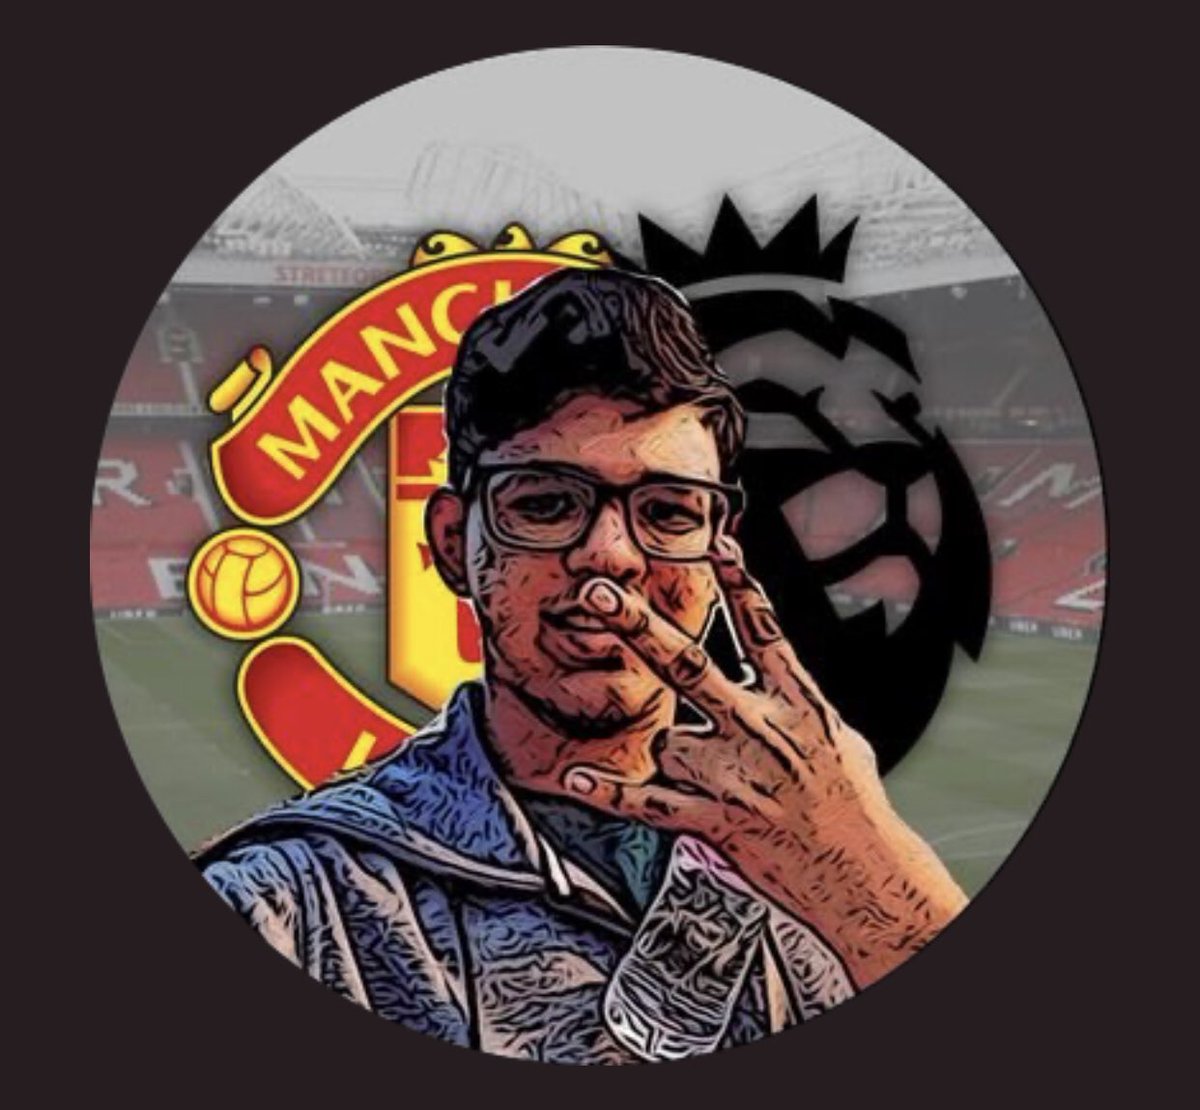  @samuel_dB_021 Original member / & host of our Wolfpack YouTube streams!A huge football fanatic, Sam watches football at all hours! Very interactive & a sound guy! We love Sam! Struggles celebrating Pukki scoring!